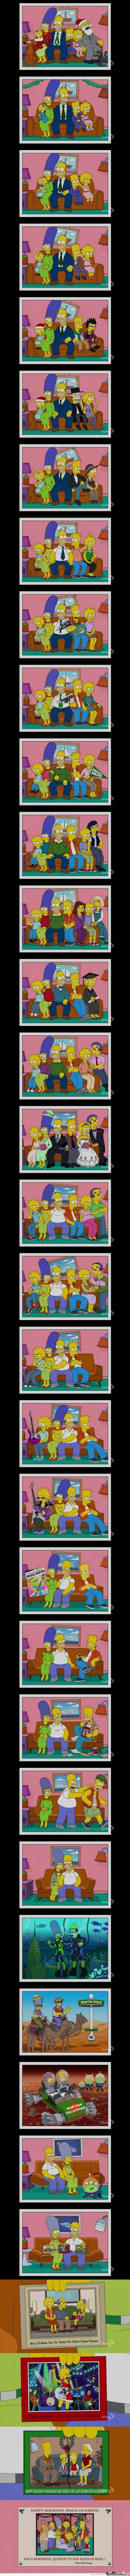 A Simpsons timeline.